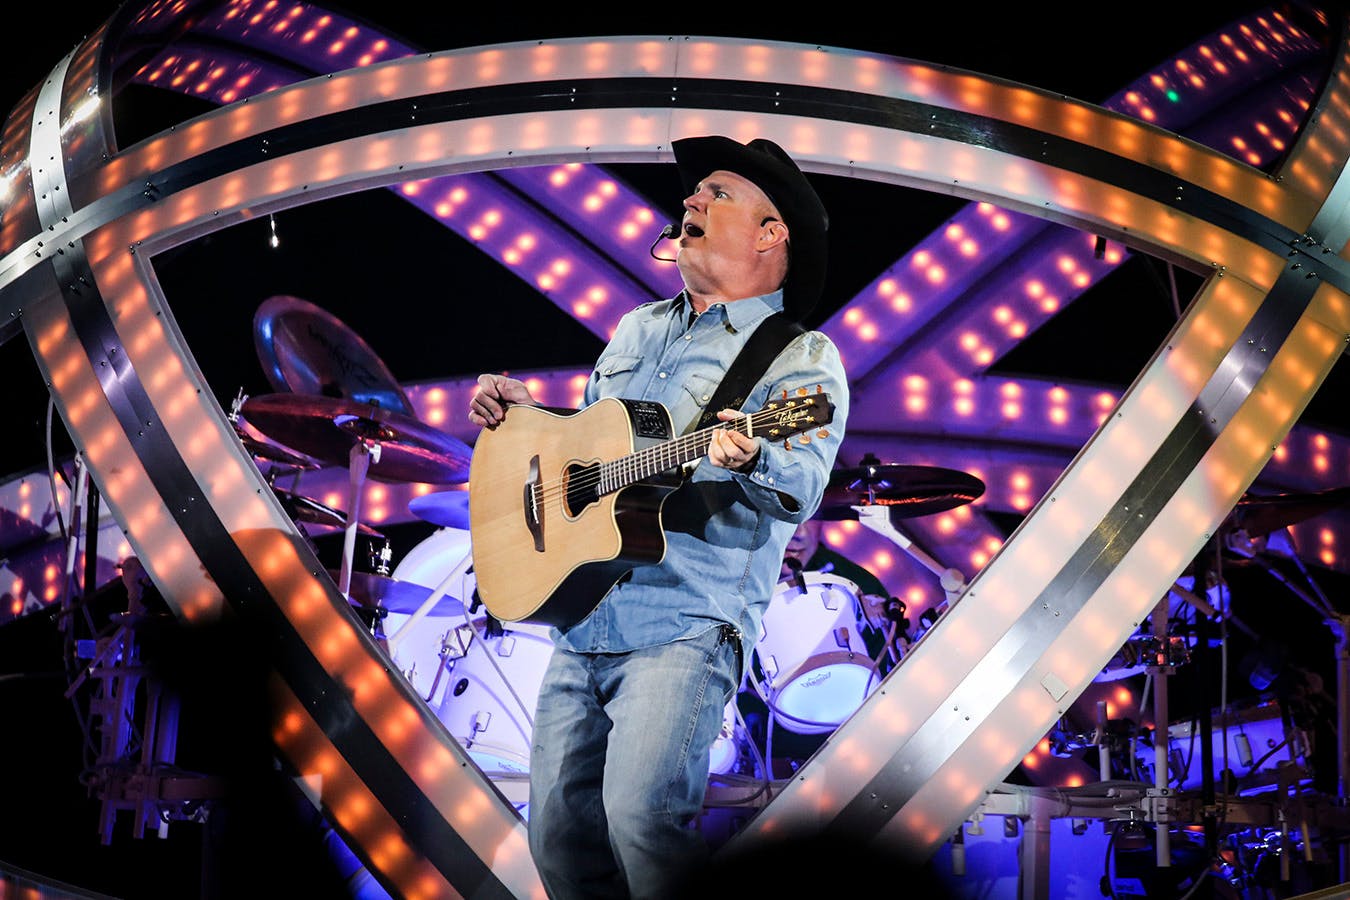 Chris Riemenschneider spoke to the country music star Thursday before the start of his 11 shows at the Target Center in Minneapolis.